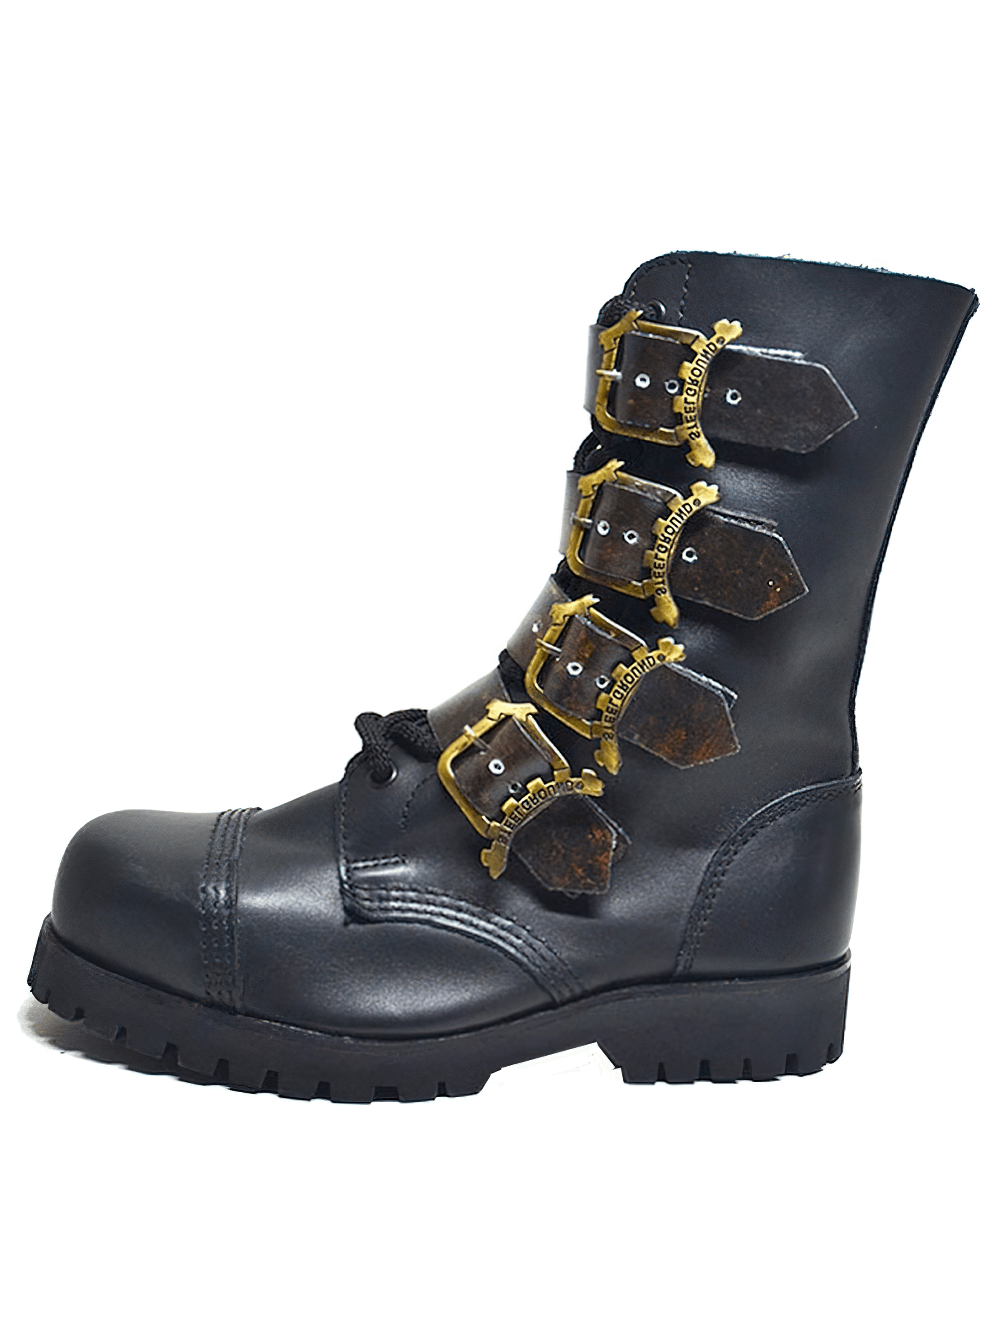 Stylish Black Grained Leather Boots with Buckles